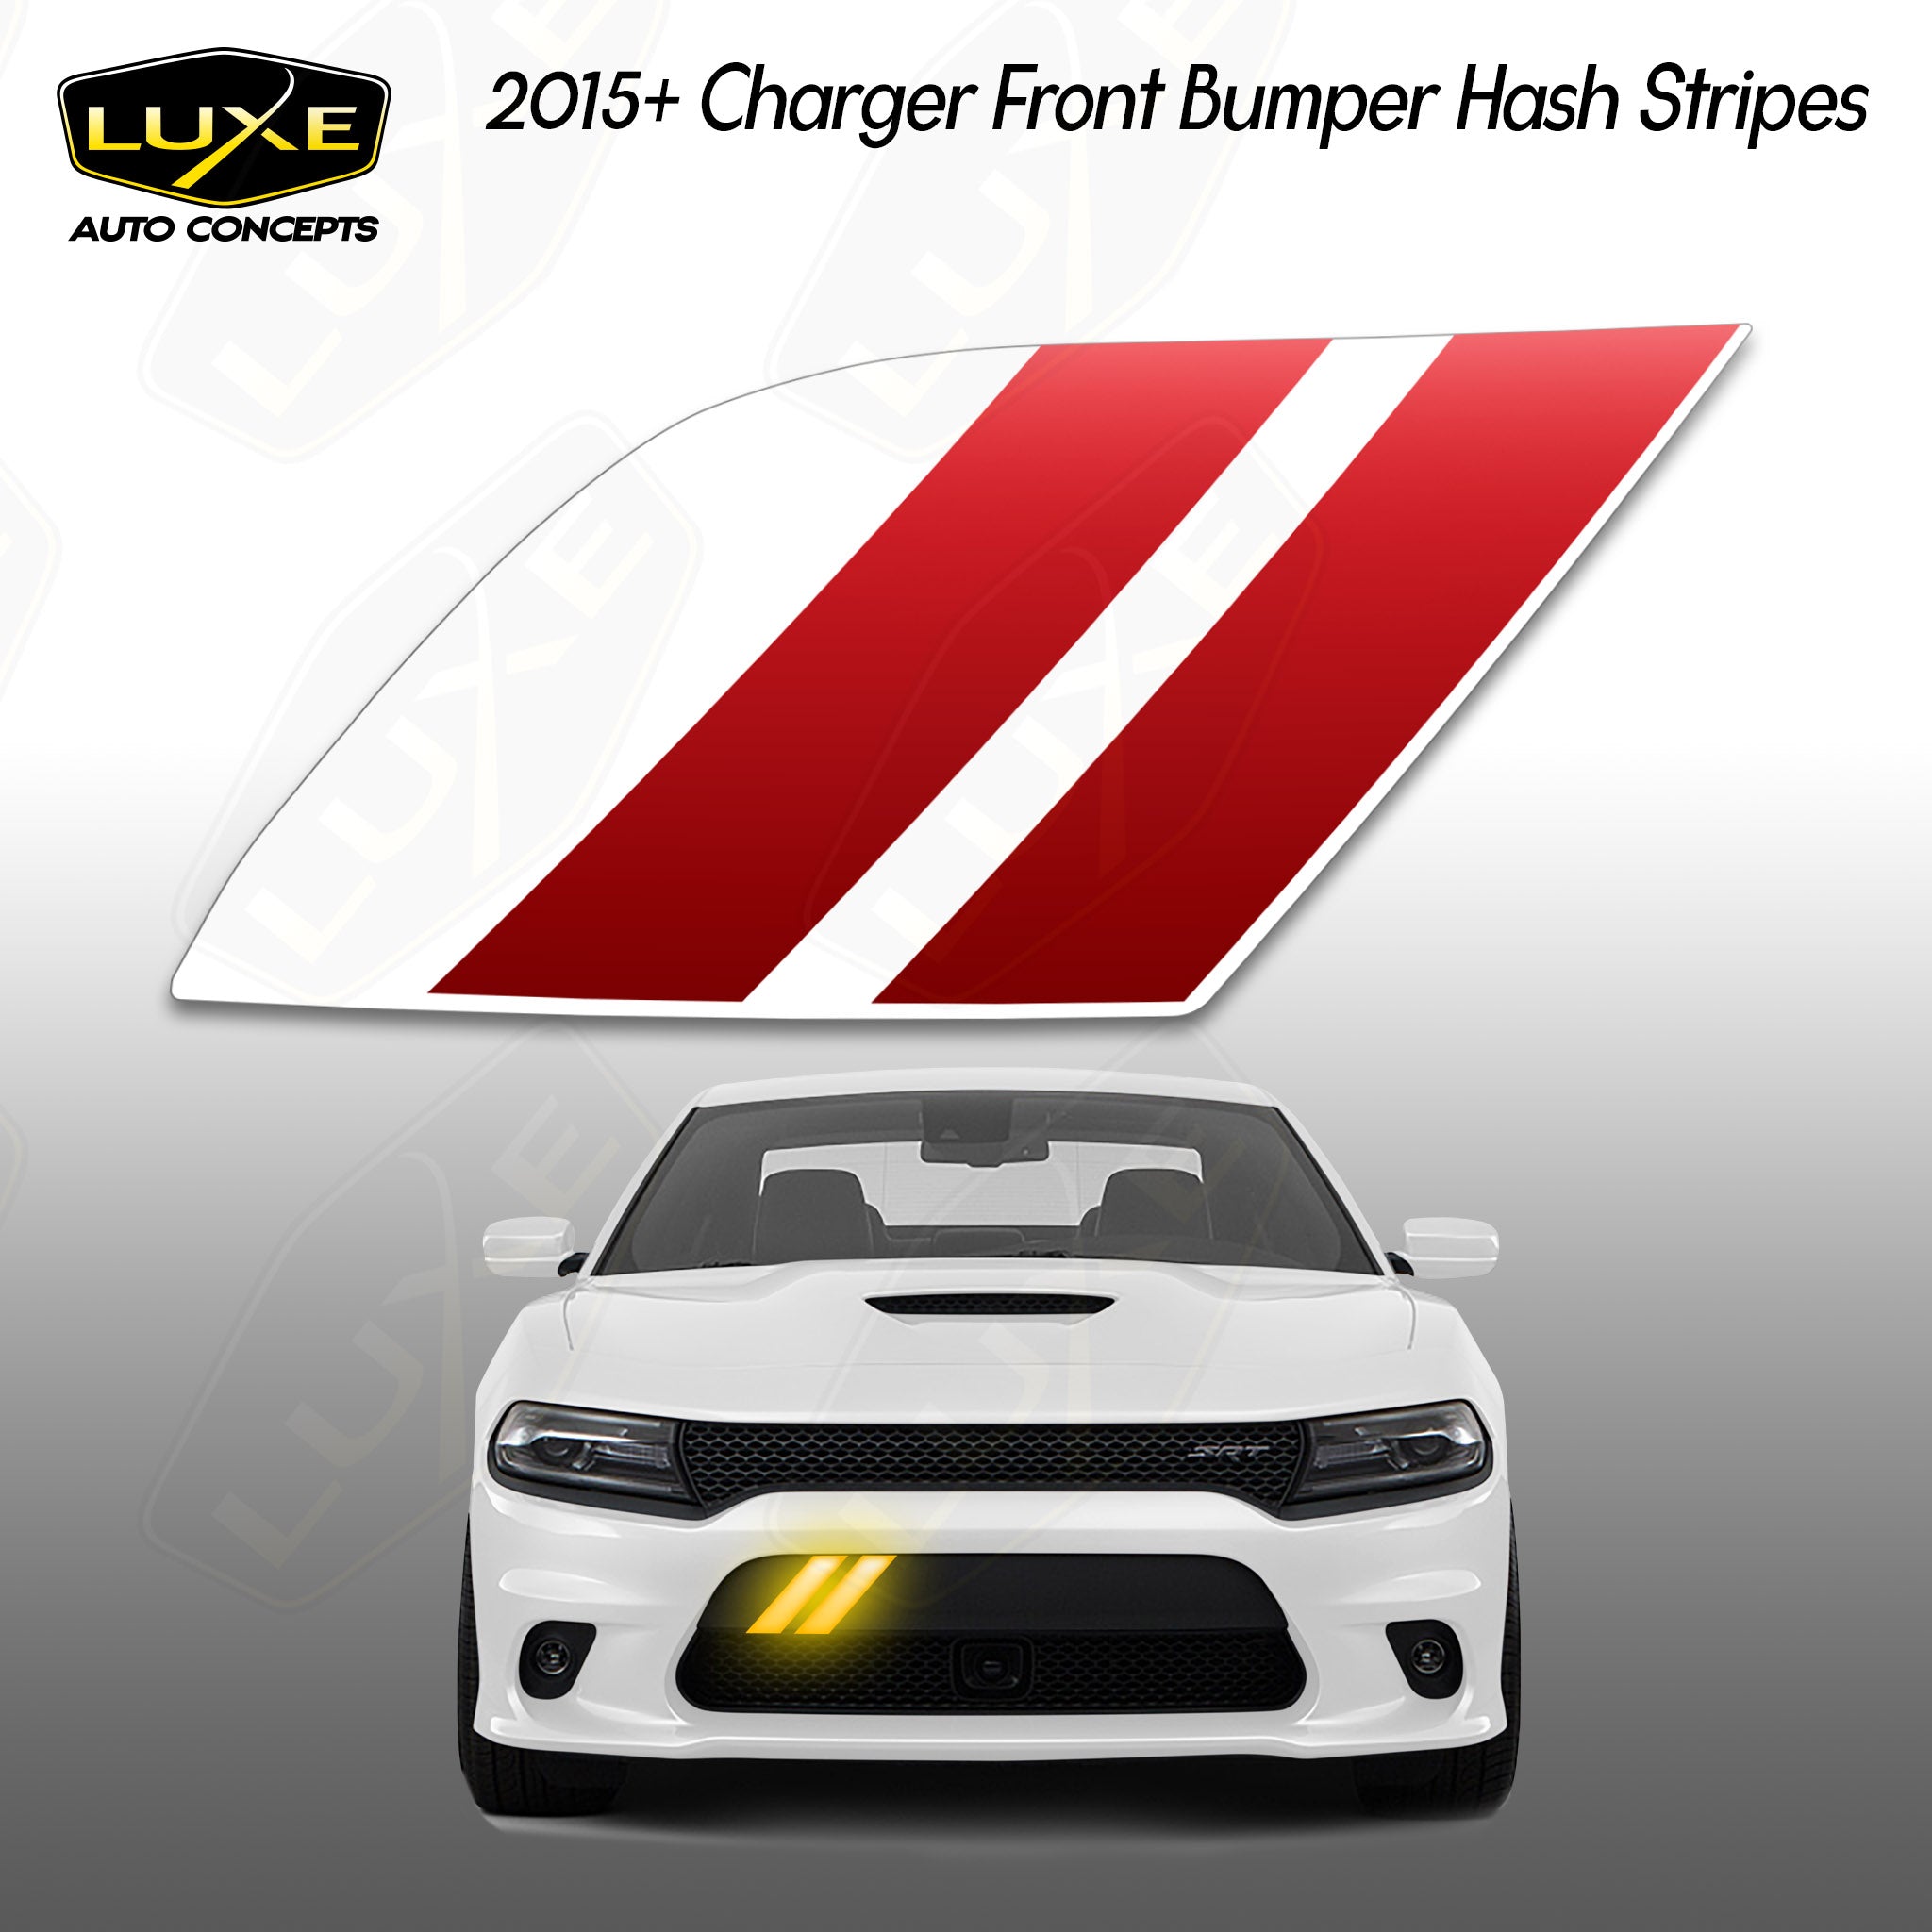 2015+ Charger Front Bumper Hash Stripes — Luxe Auto Concepts